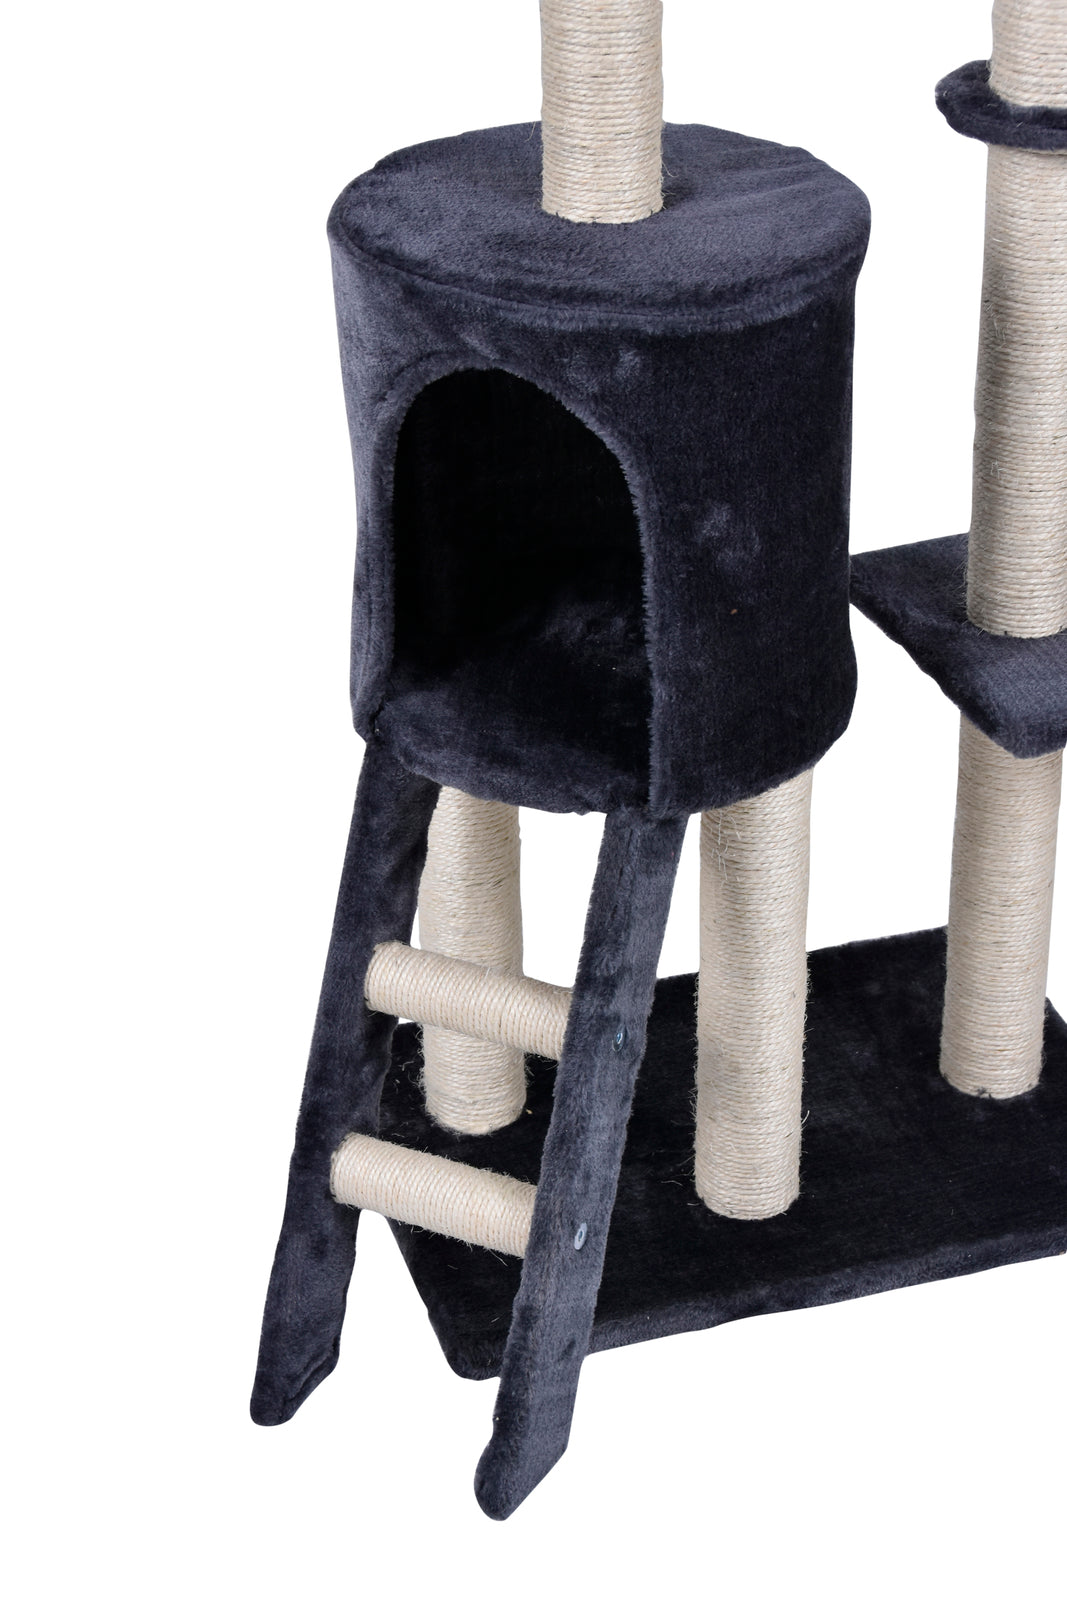 138cm Cat Scratching Post Tree Post House Tower with Ladder-Grey